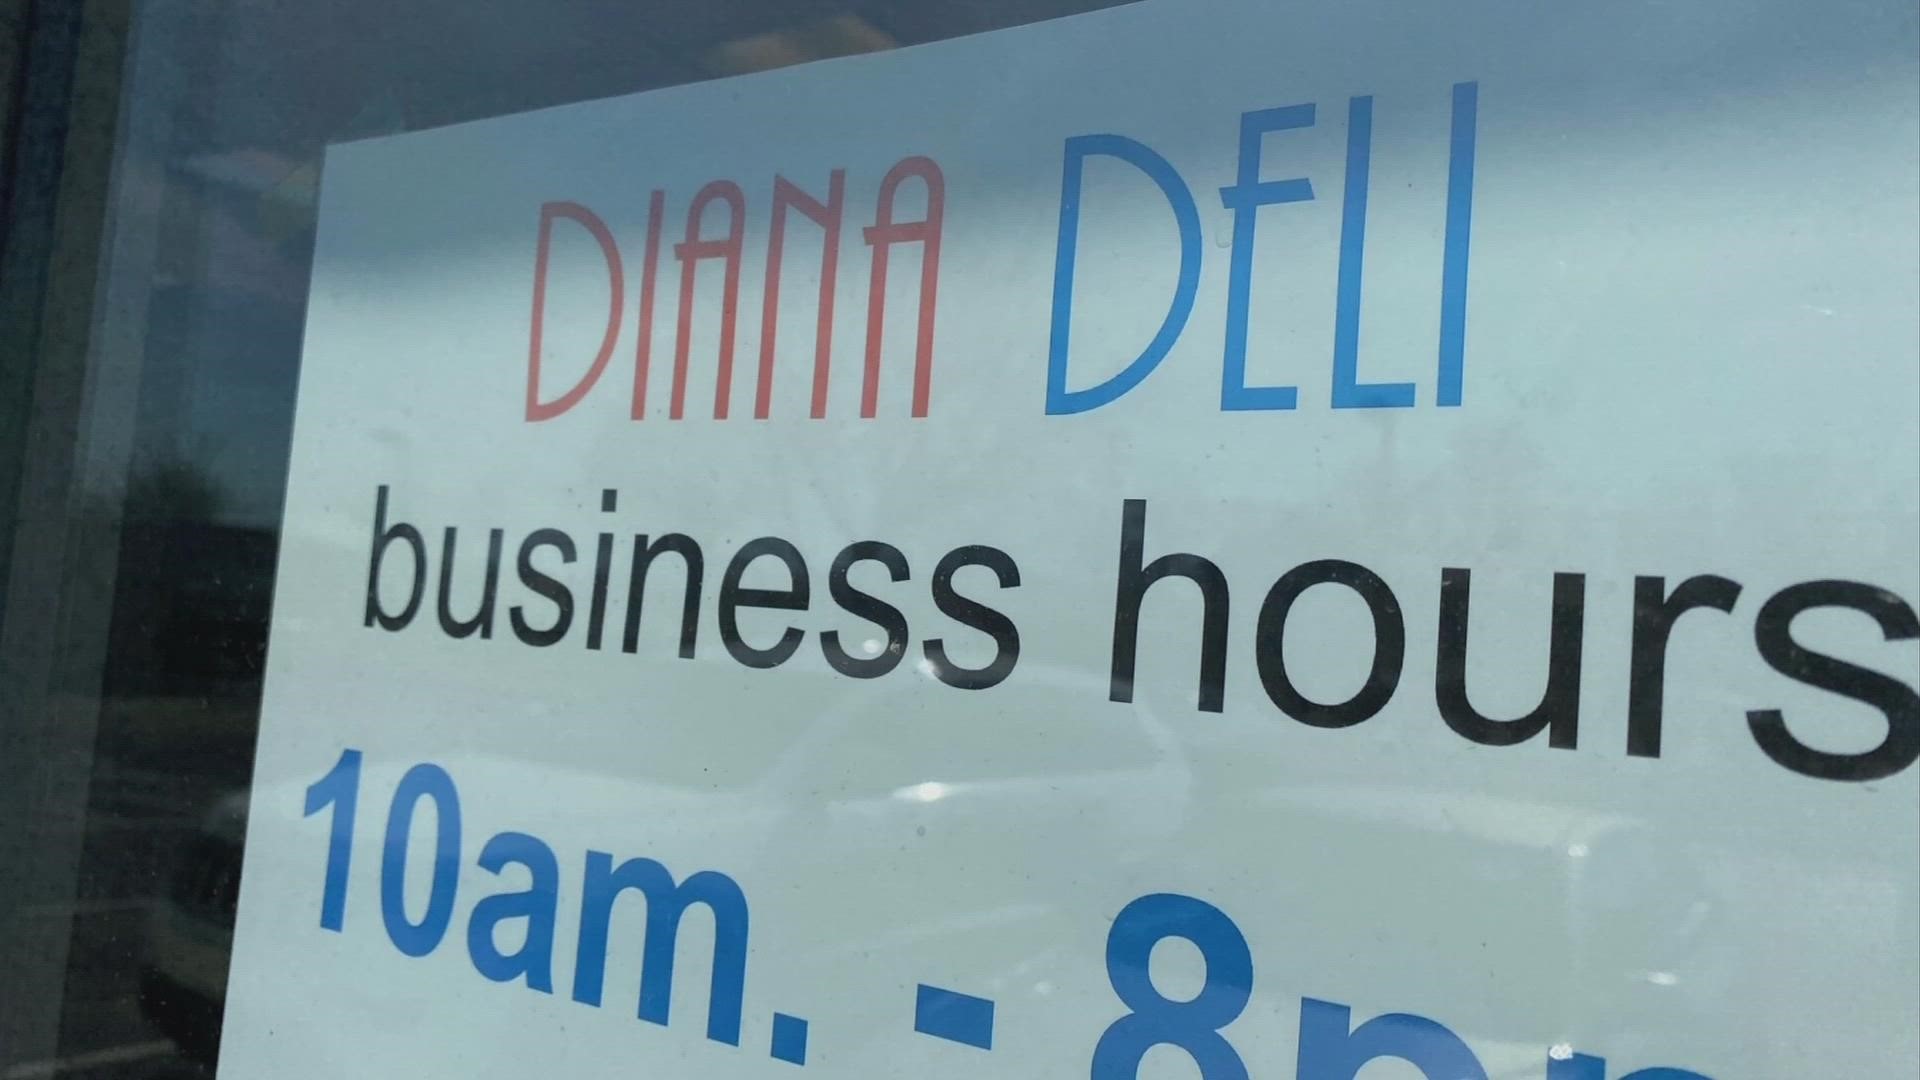 The people who run Diana Del sell food and treats from across eastern Europe, not just Russia. They say they are devastated by what's happening in Ukraine.